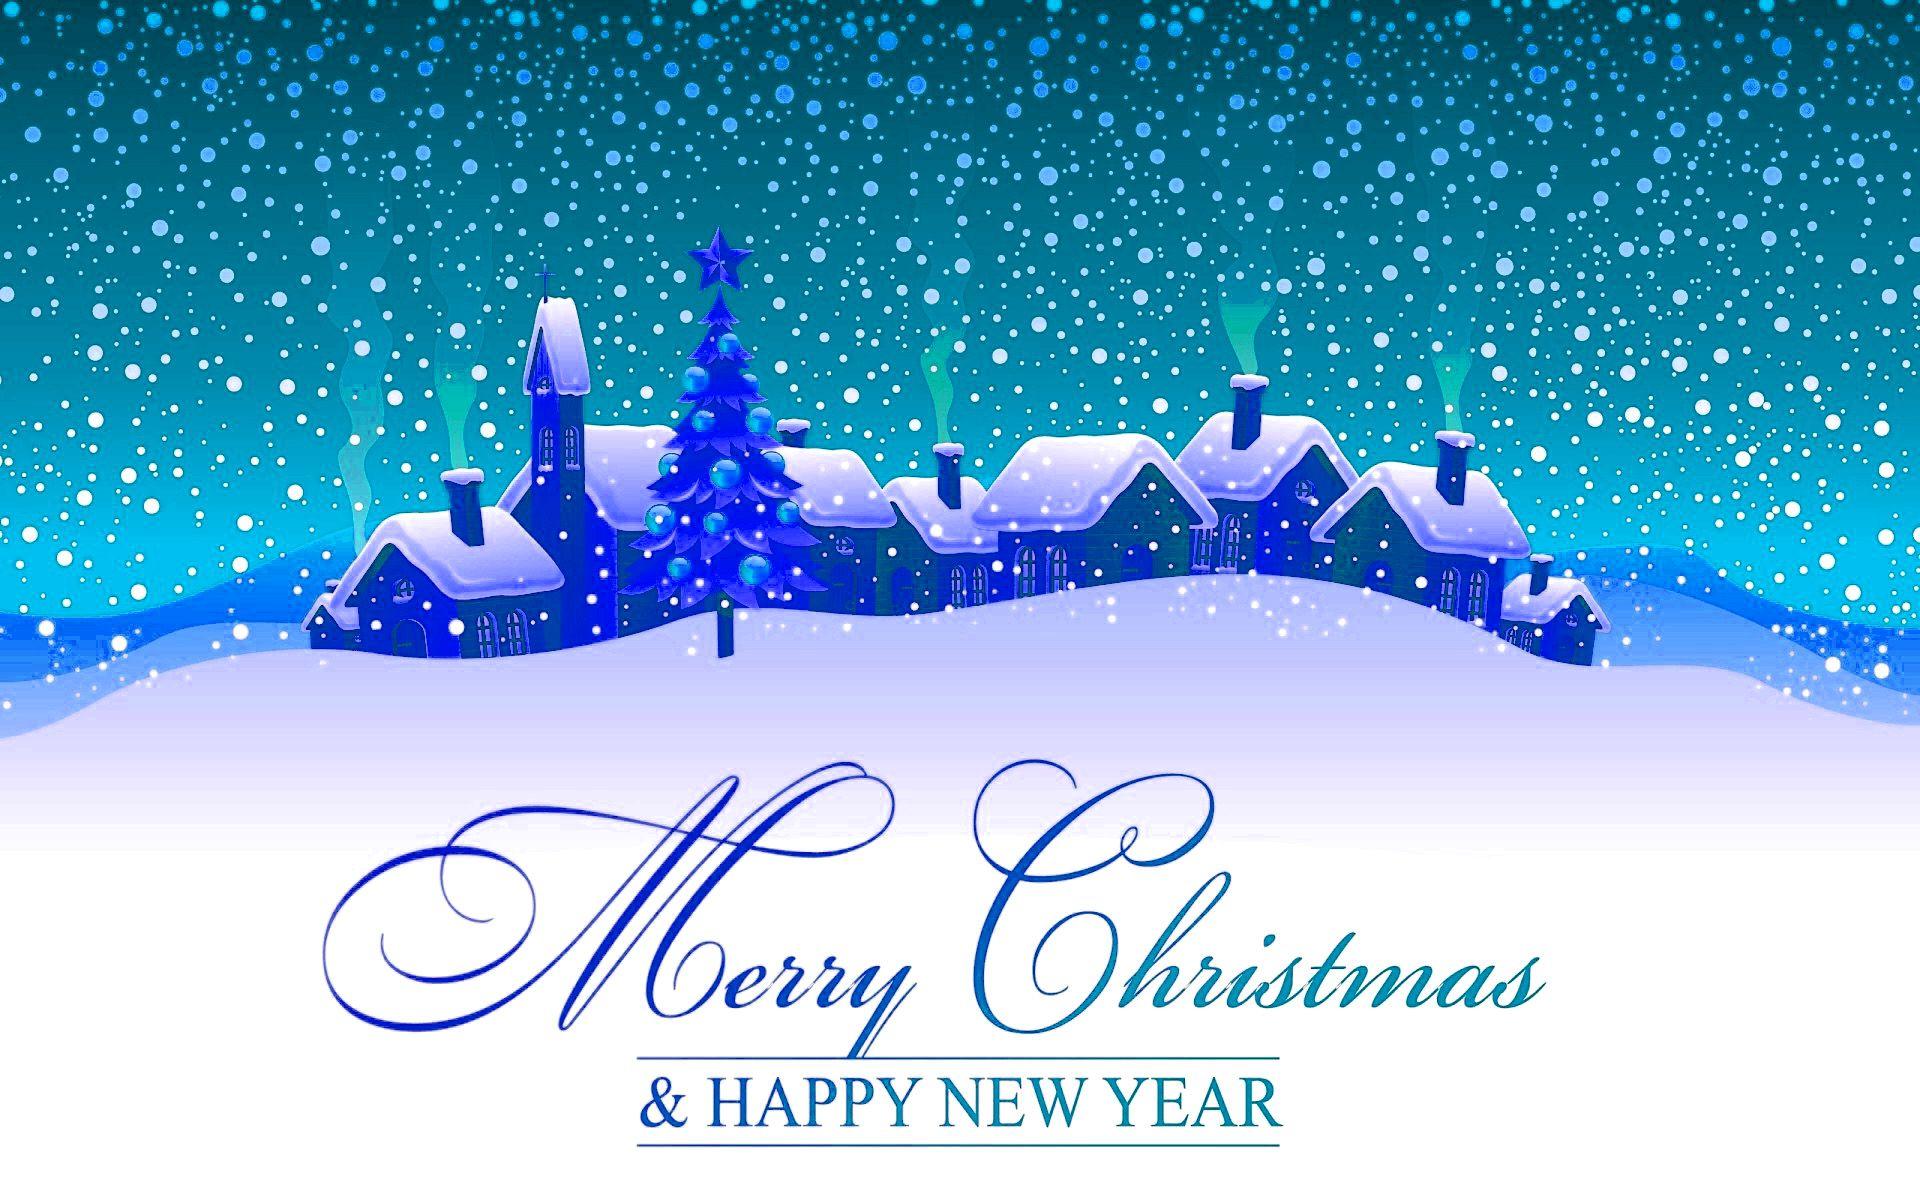 Best Merry Christmas 2018 And Happy New Year 2019 Image